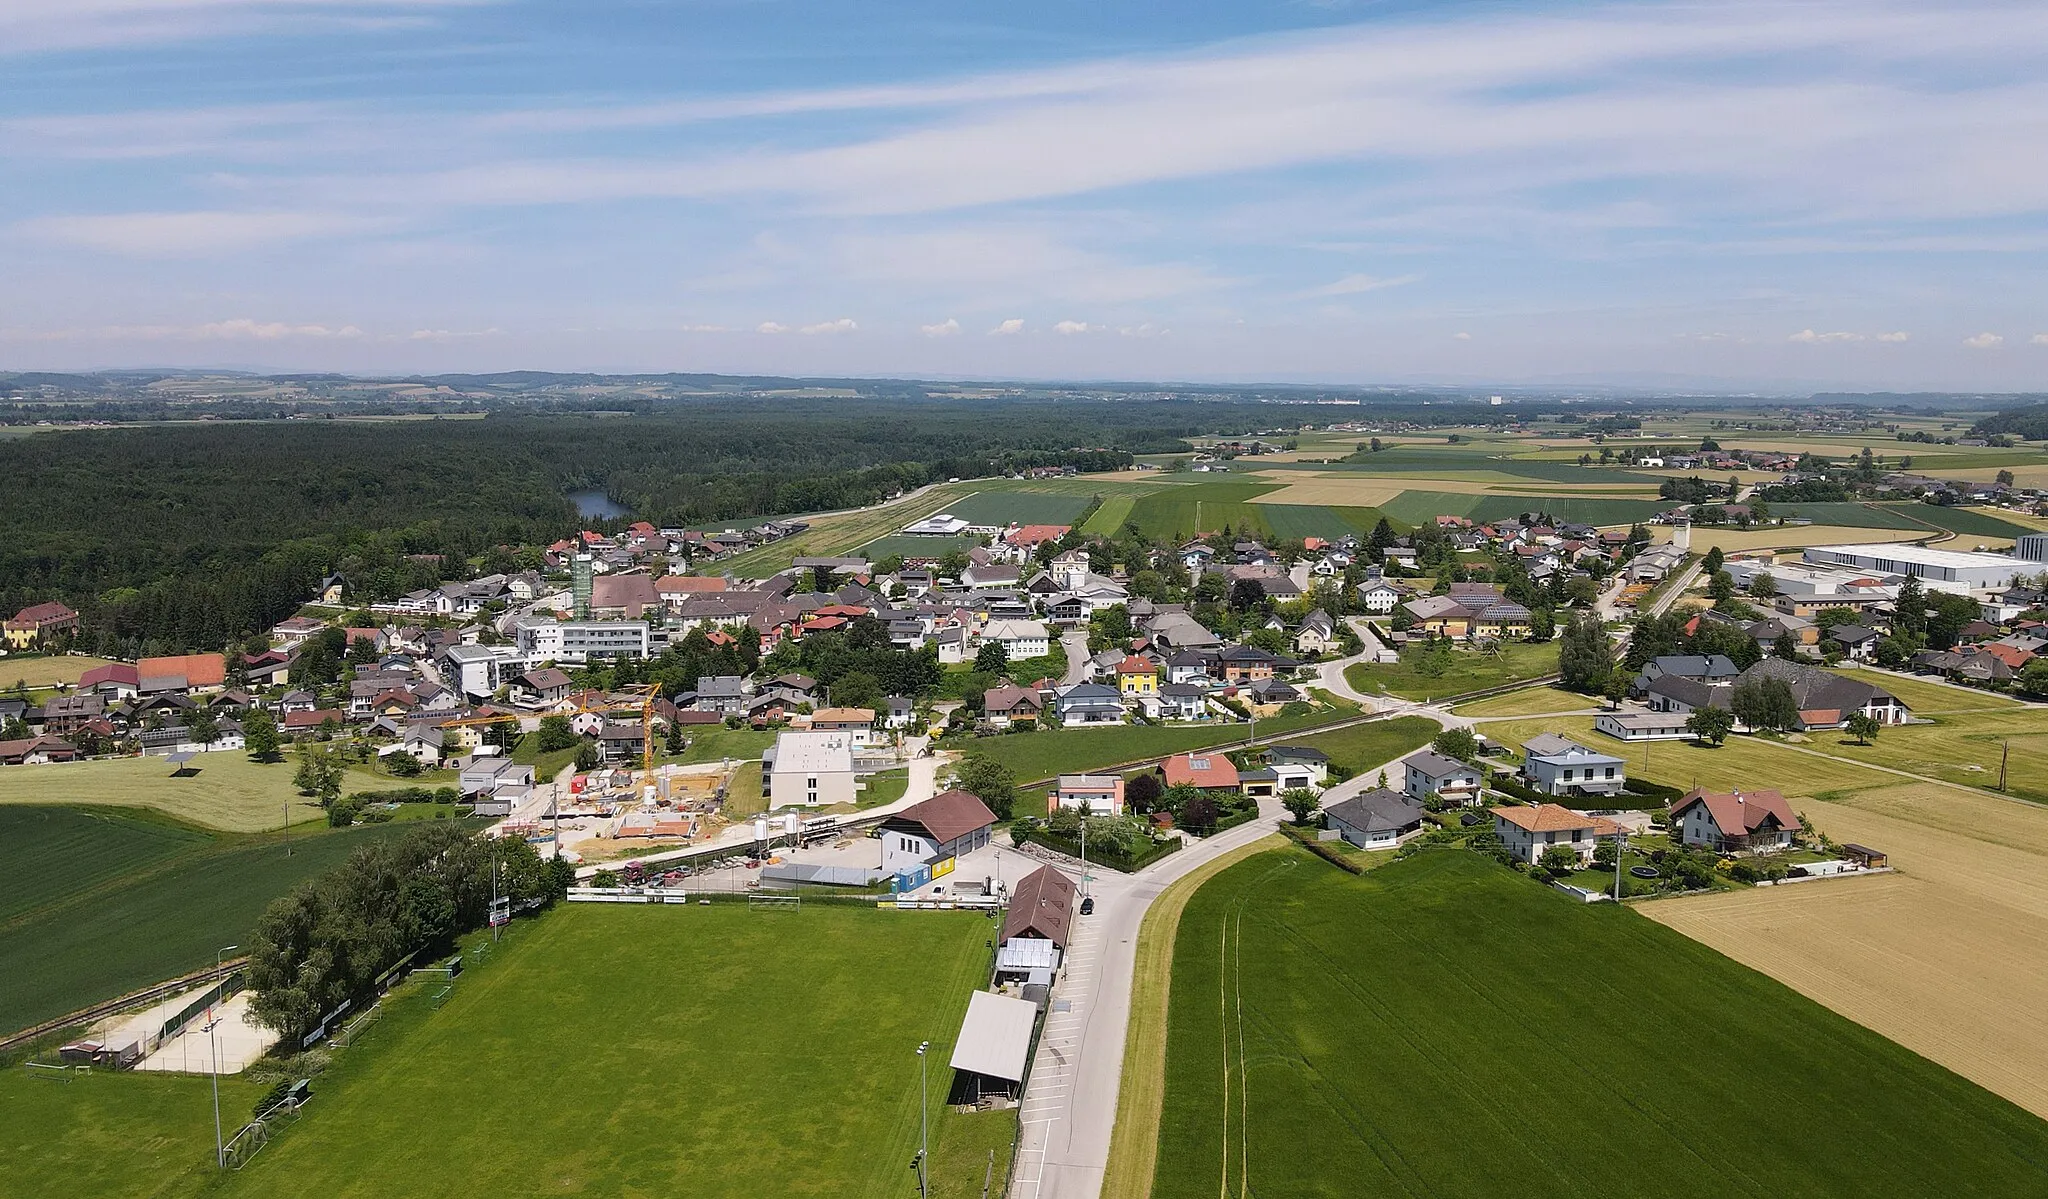 Photo showing: Aerial view of Roitham, Upper Austria.